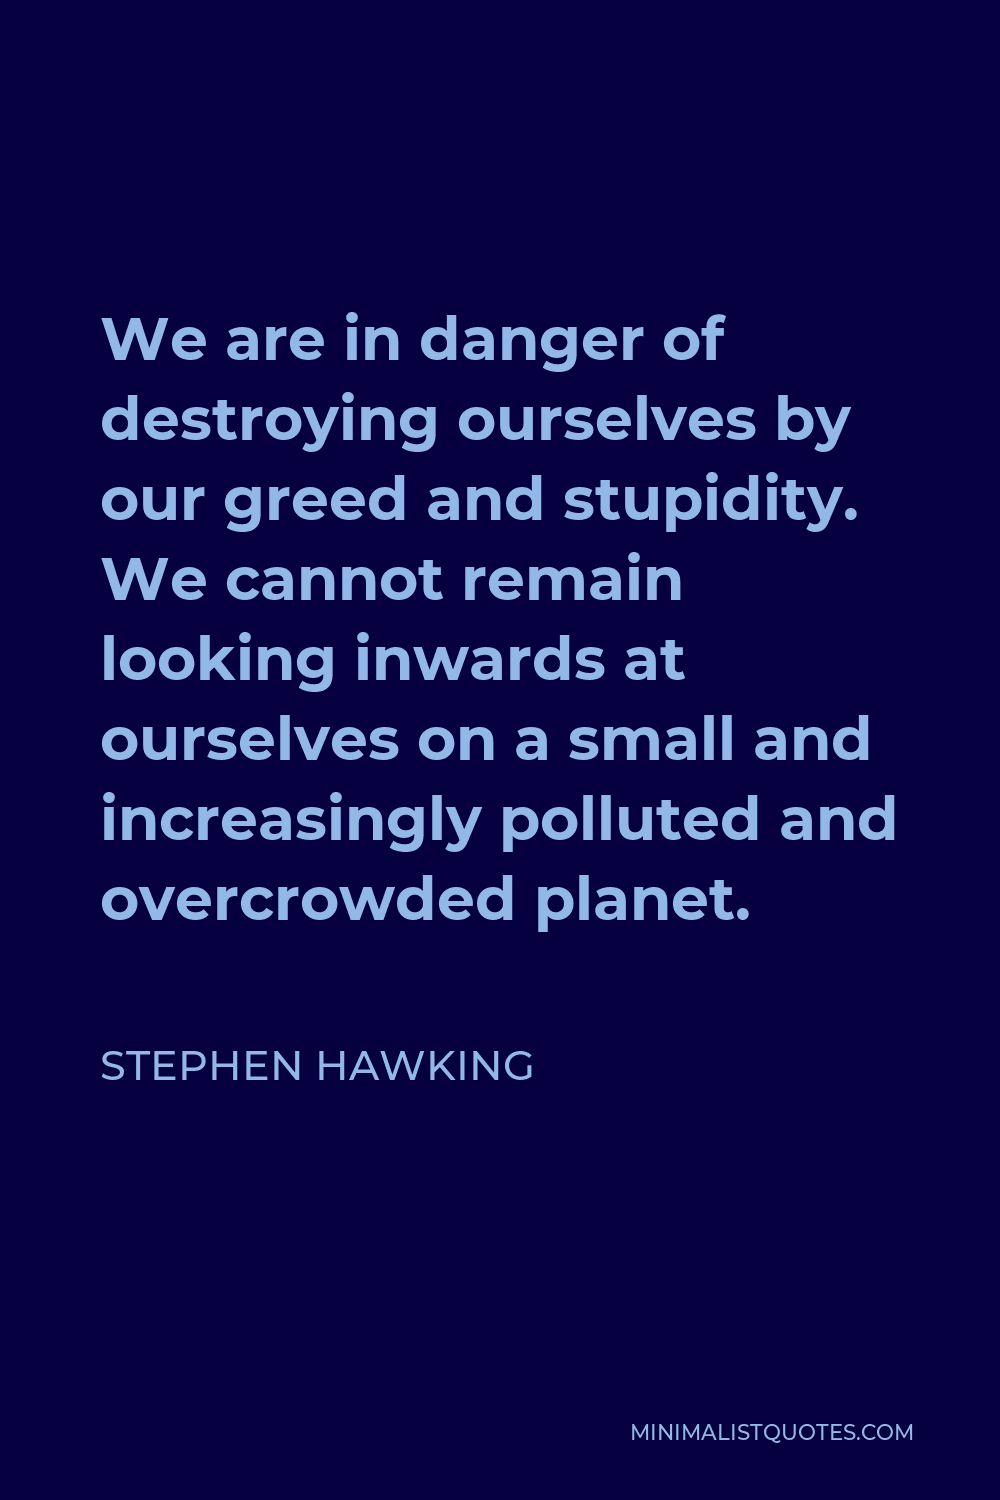 Stephen Hawking Quote - We are in danger of destroying ourselves by our greed and stupidity. We cannot remain looking inwards at ourselves on a small and increasingly polluted and overcrowded planet.